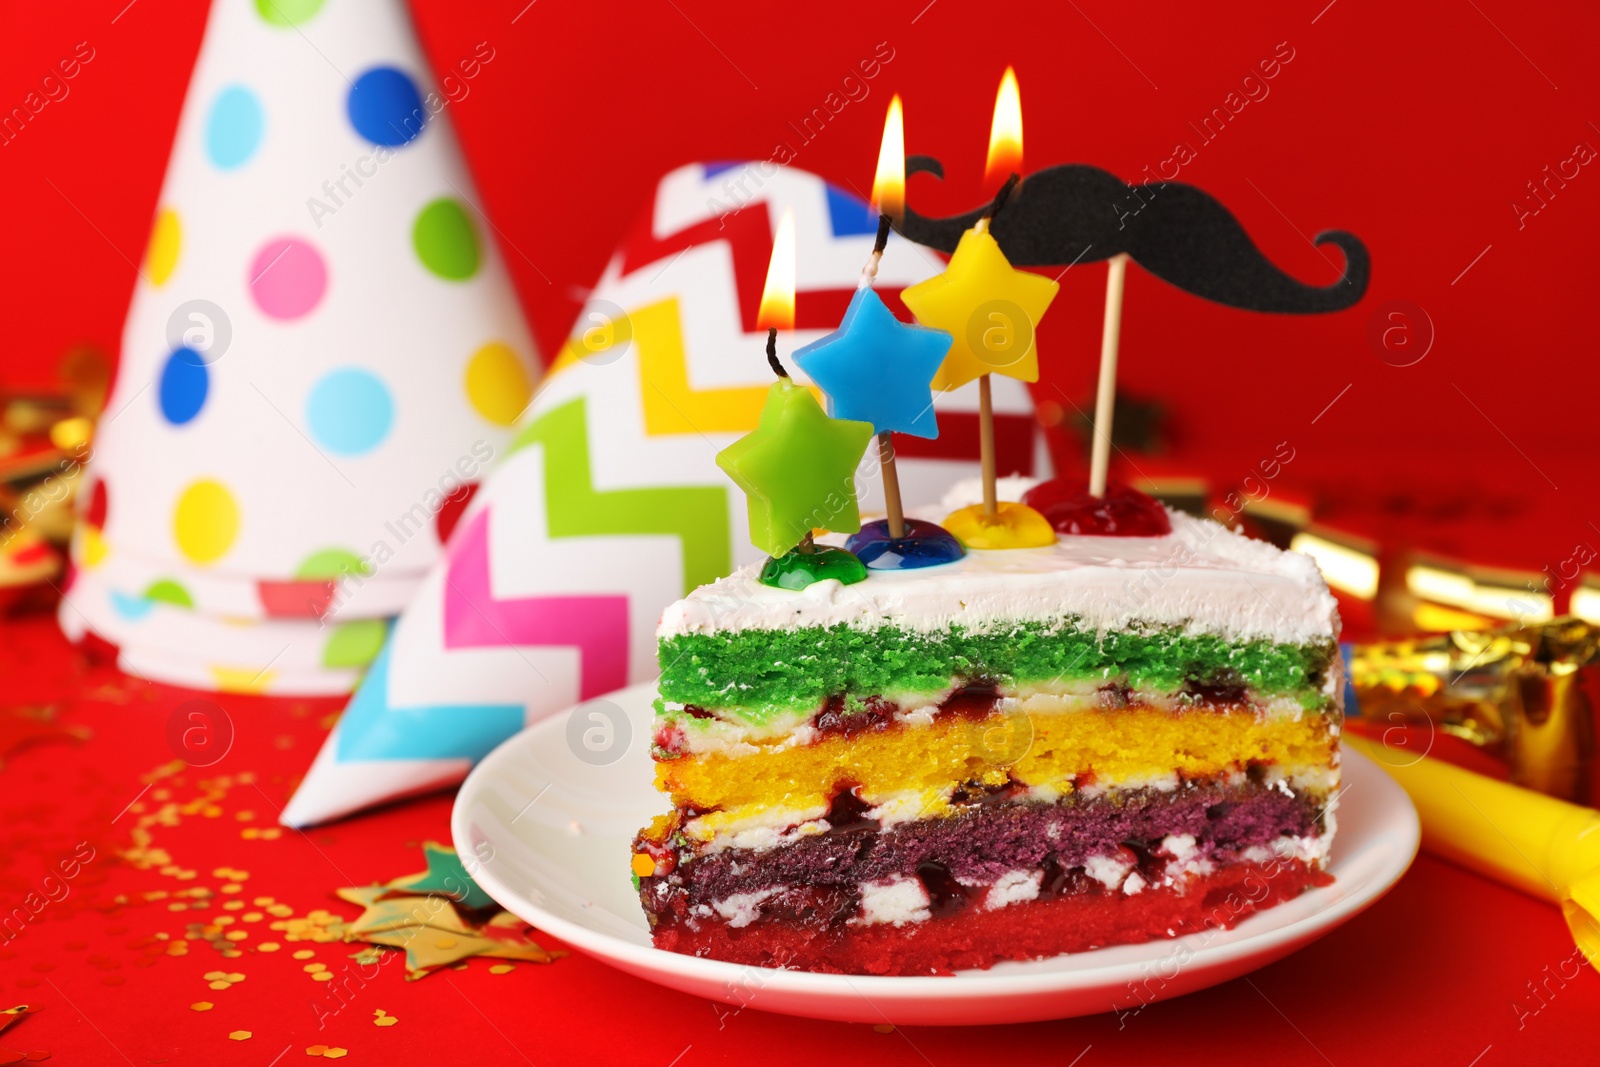 Photo of Piece of birthday cake with candles on red background